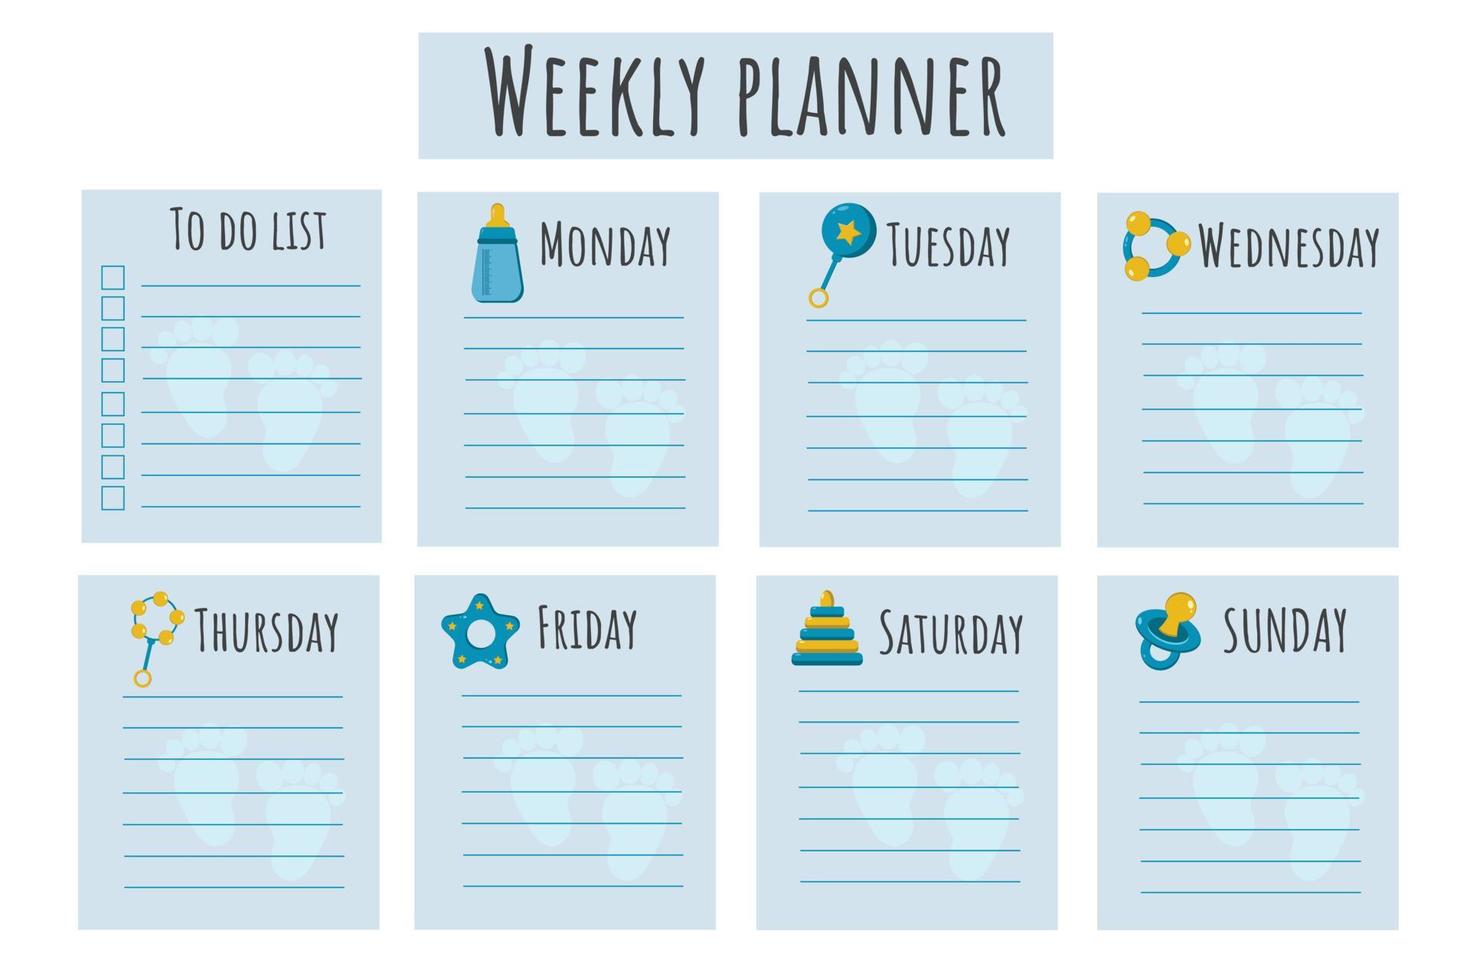 Schedule for the baby's mom. Schedule for the week for the boy's mother. A place to take notes, organizer for the day of the week for planning. Young mom's schedule. Weekly planner for mom. vector